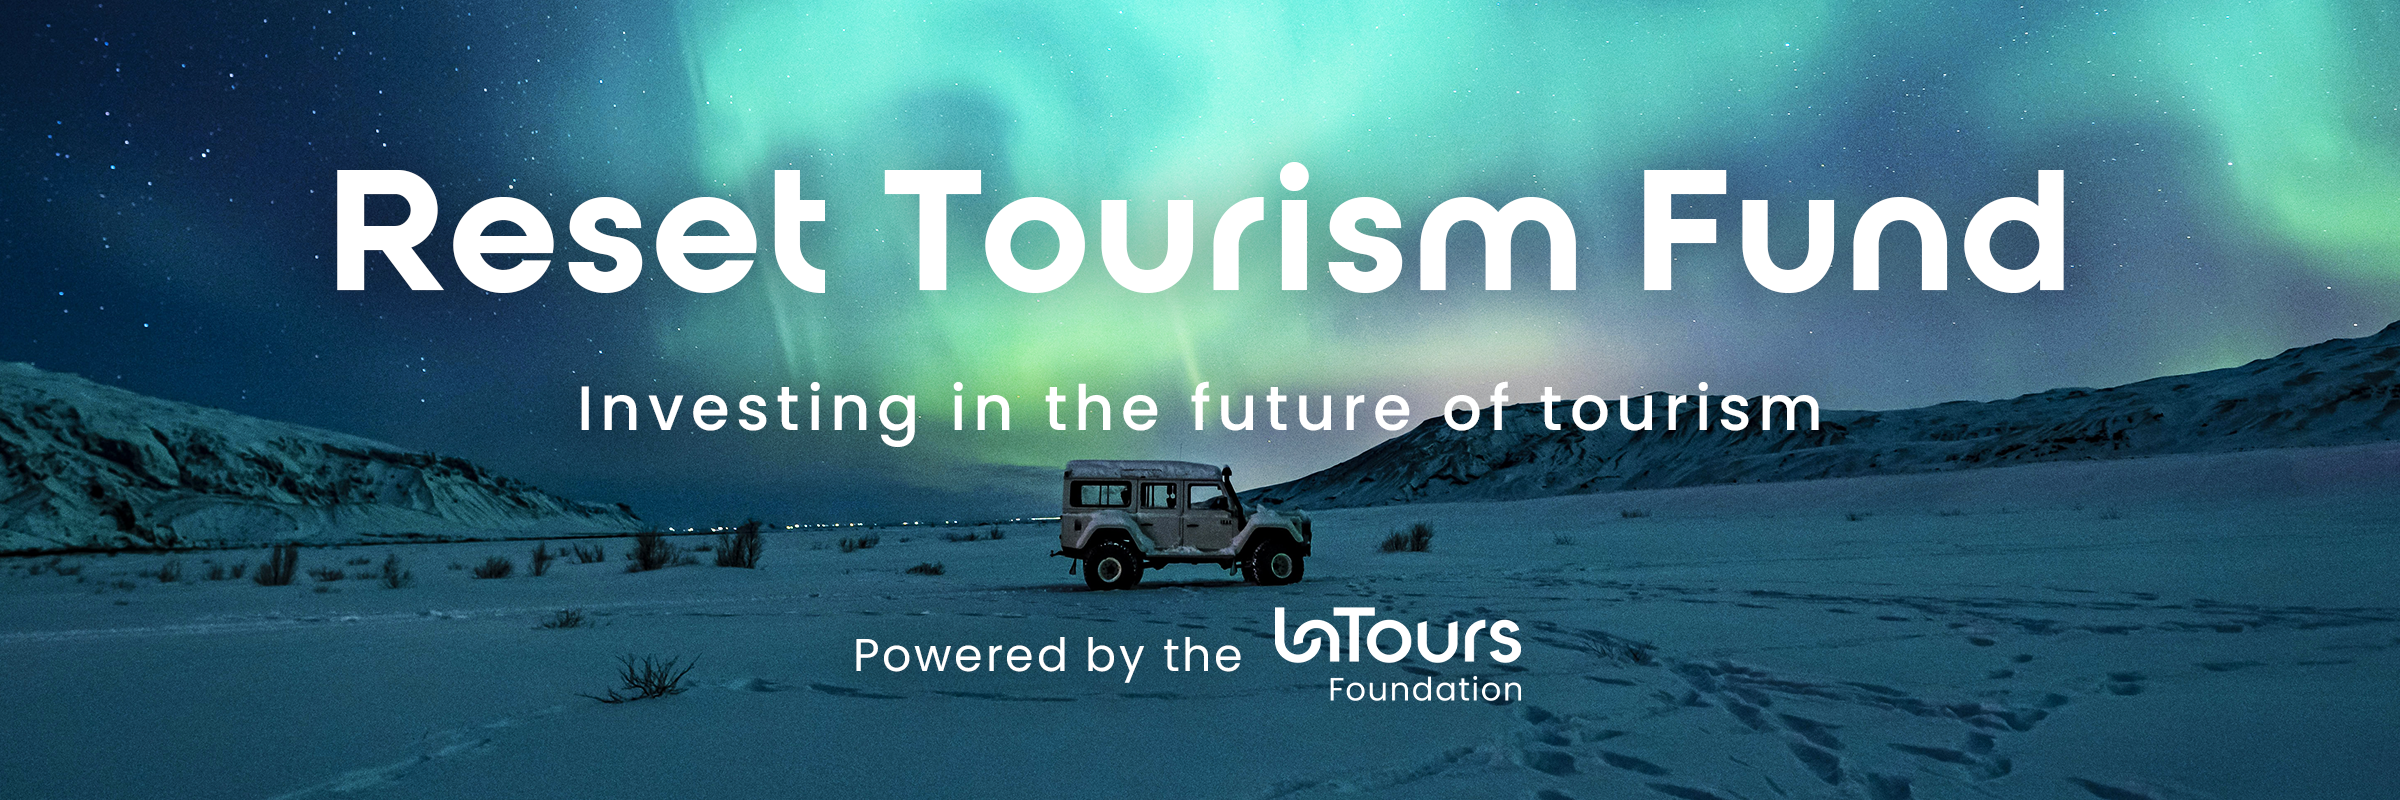 BANNER: Reset Tourisim Fund investing in the future of tourism. Powered by the UnTours Foundation